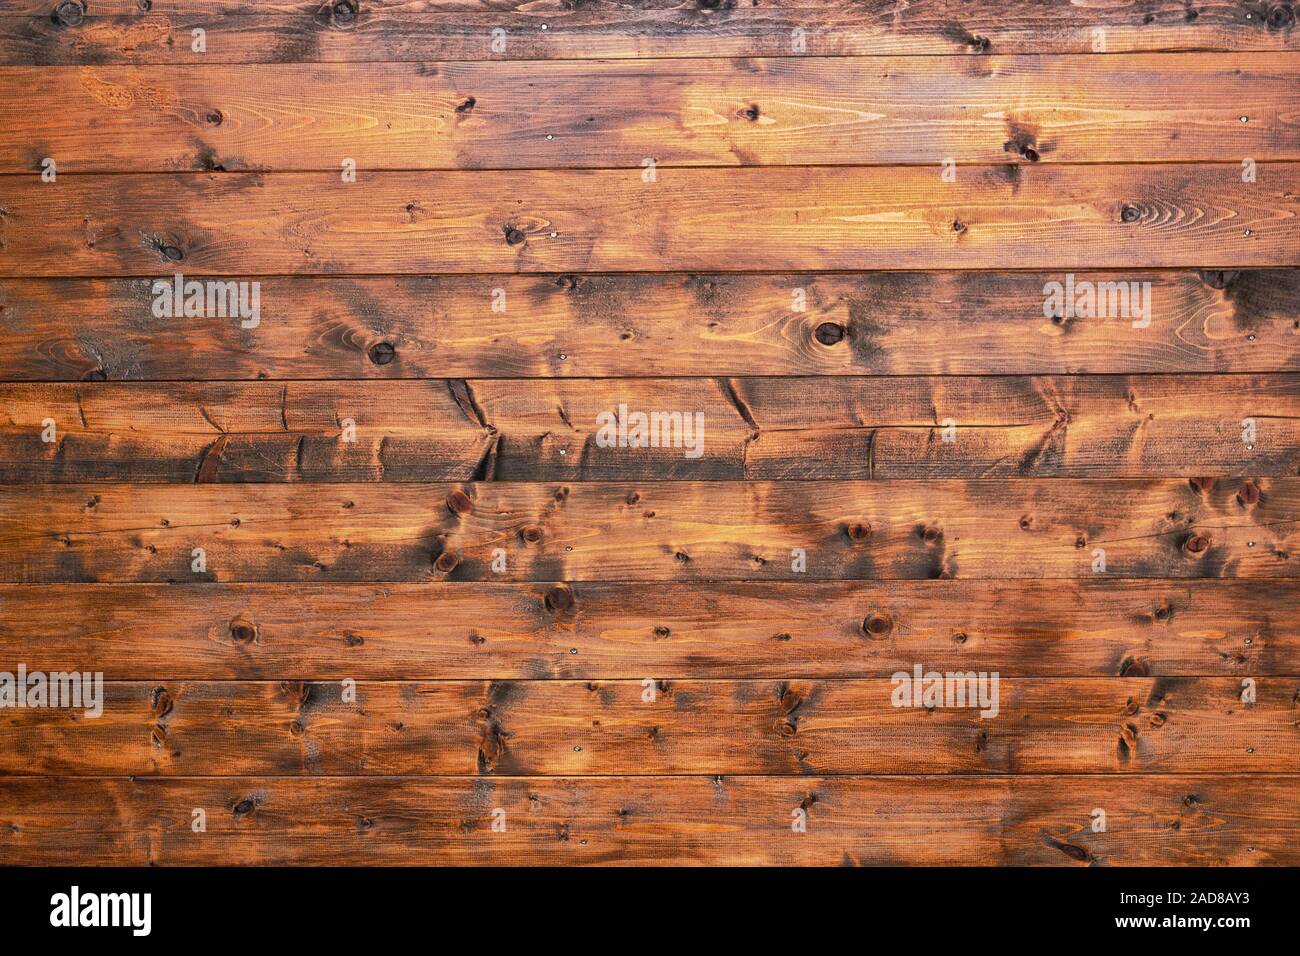 wooden ceiling Stock Photo